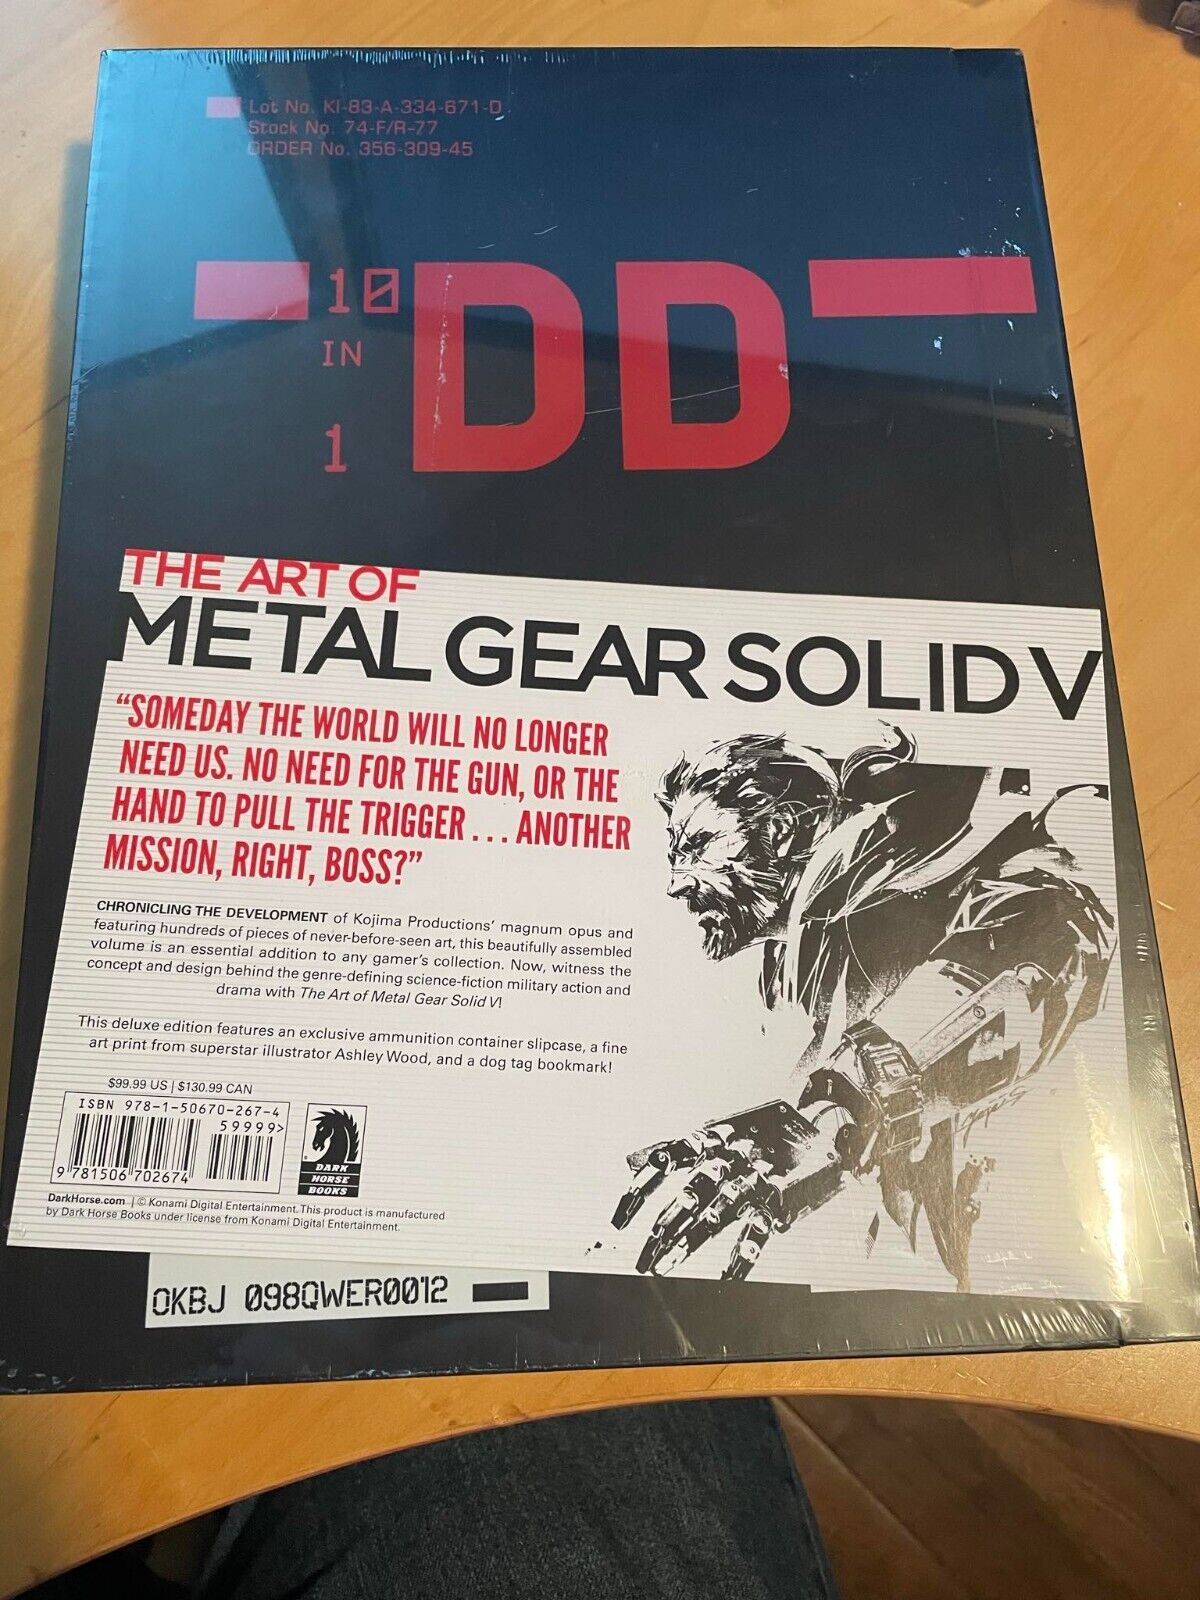 The Art of Metal Gear Solid V Limited Edition Hardcover Art Book, Sealed, Rare